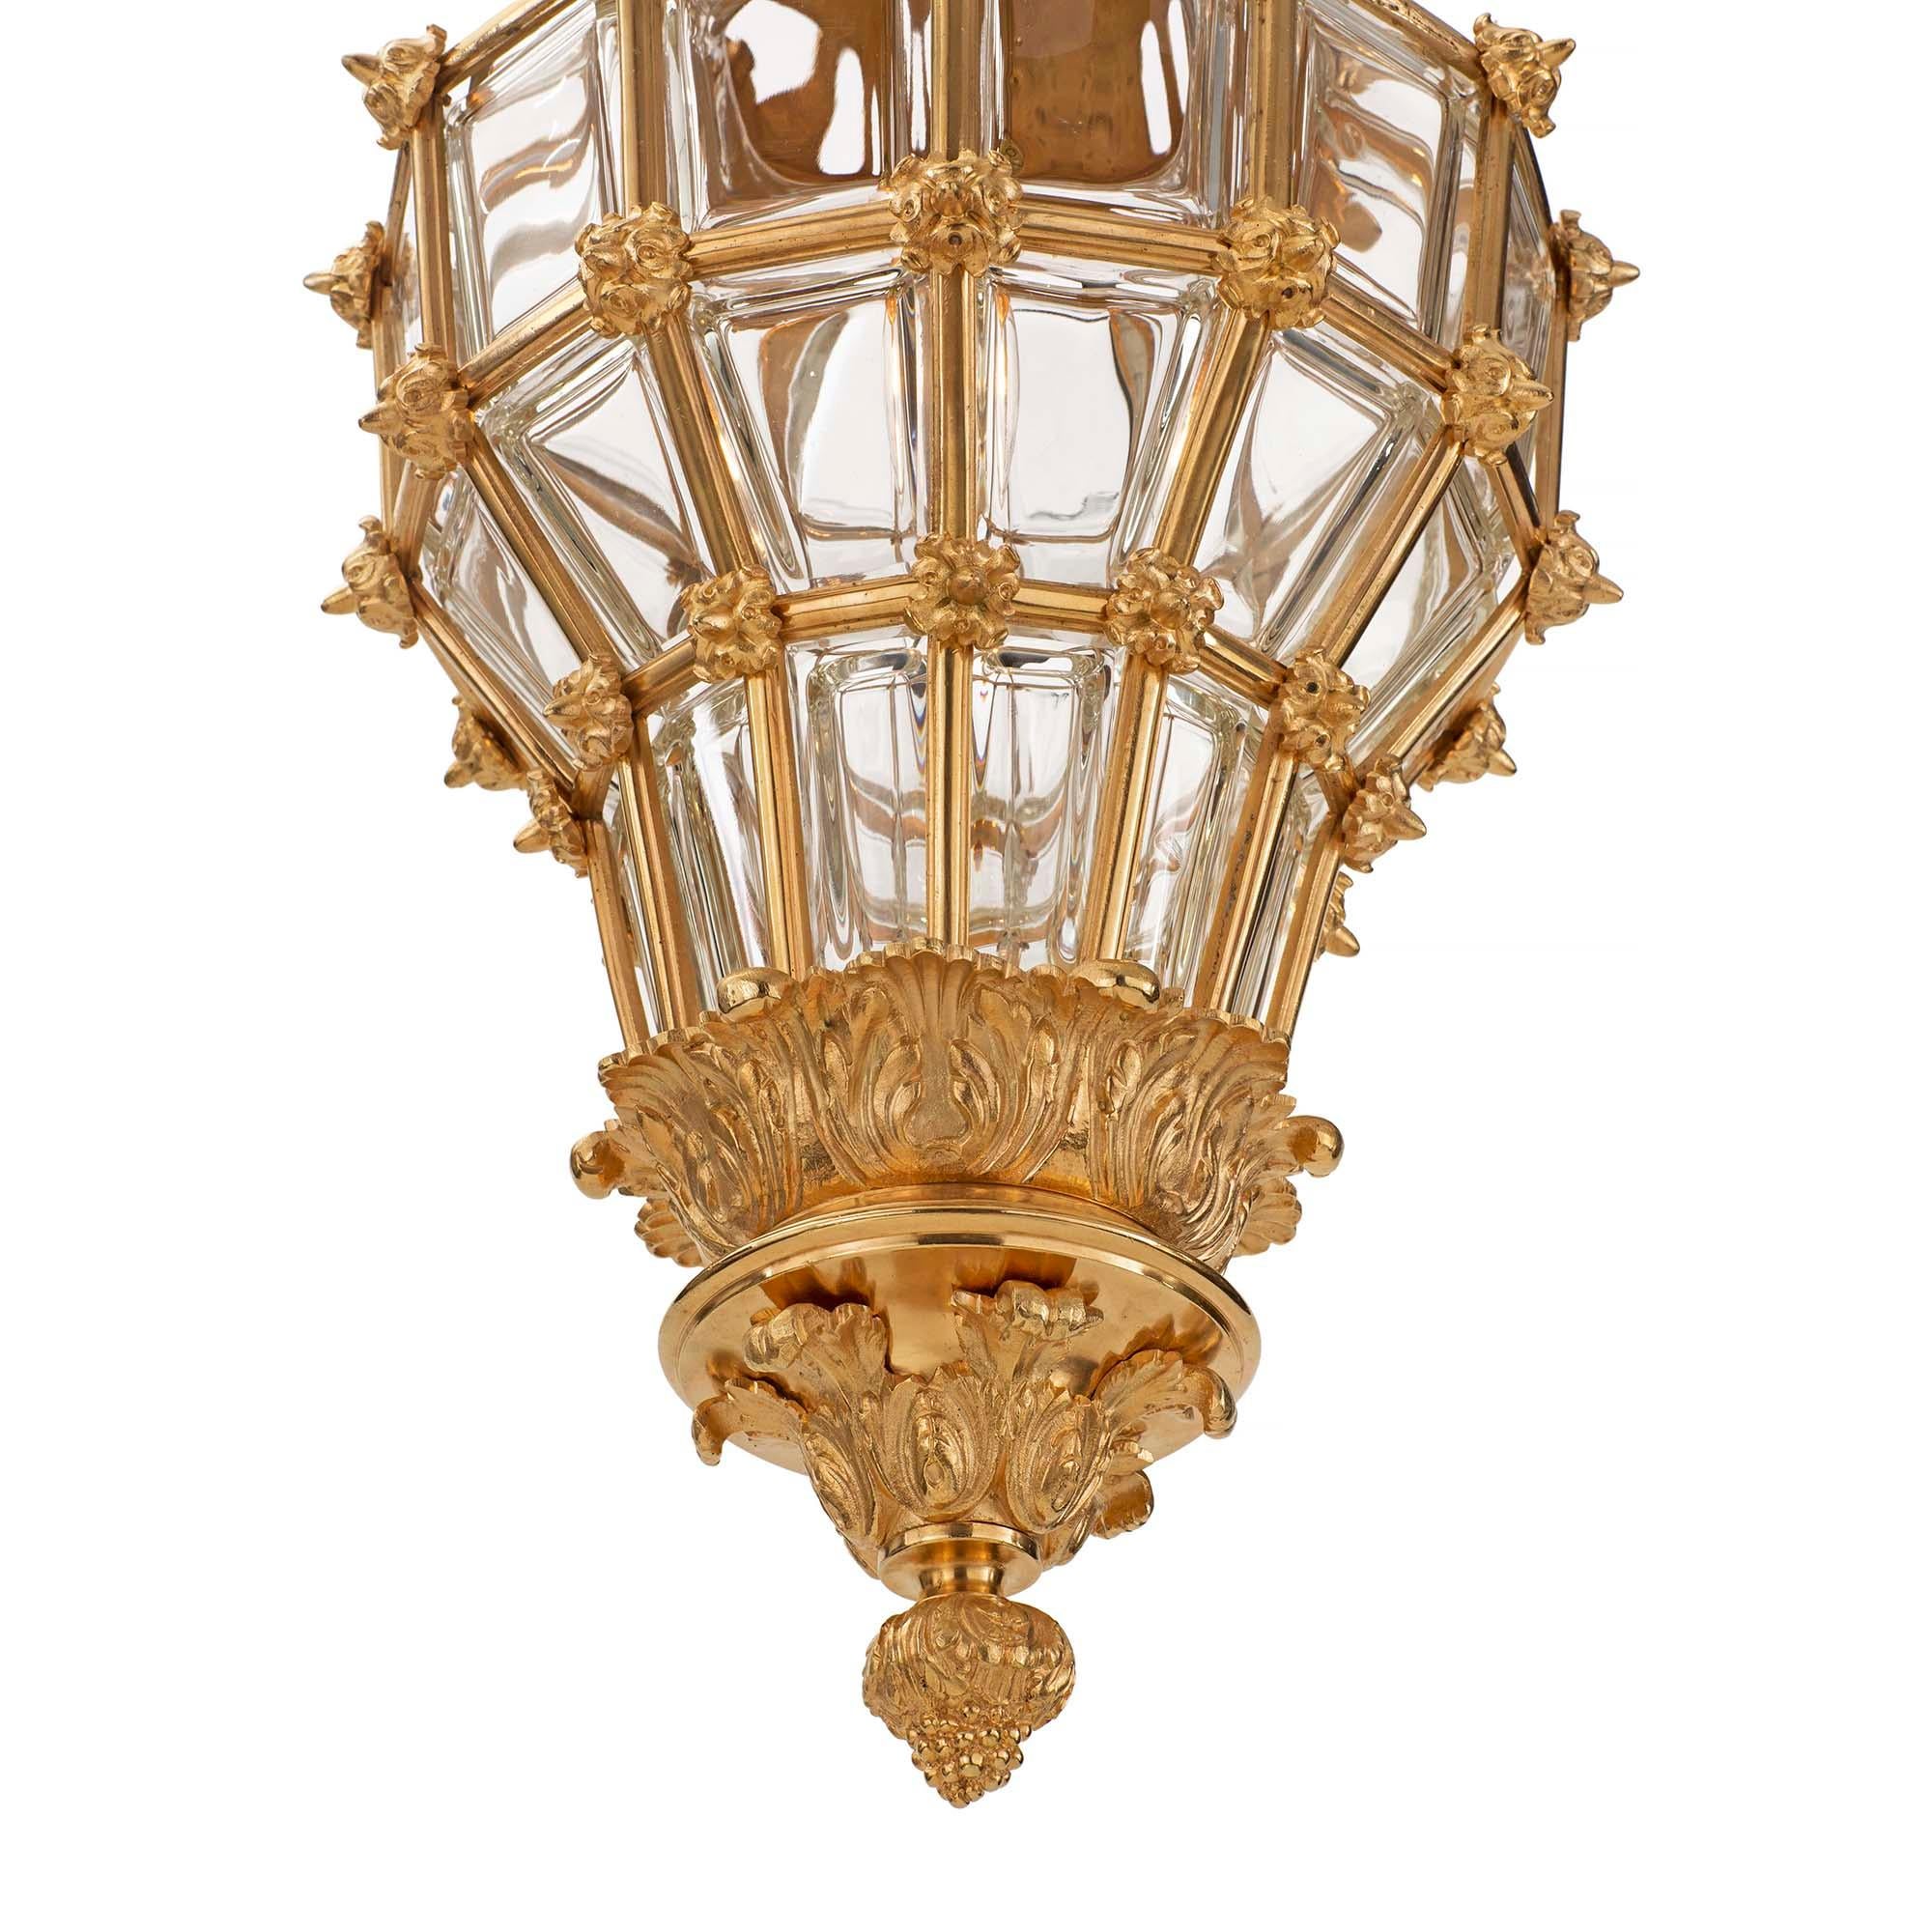 French 19th Century Louis XIV Style Ormolu and Crystal Lantern In Good Condition For Sale In West Palm Beach, FL